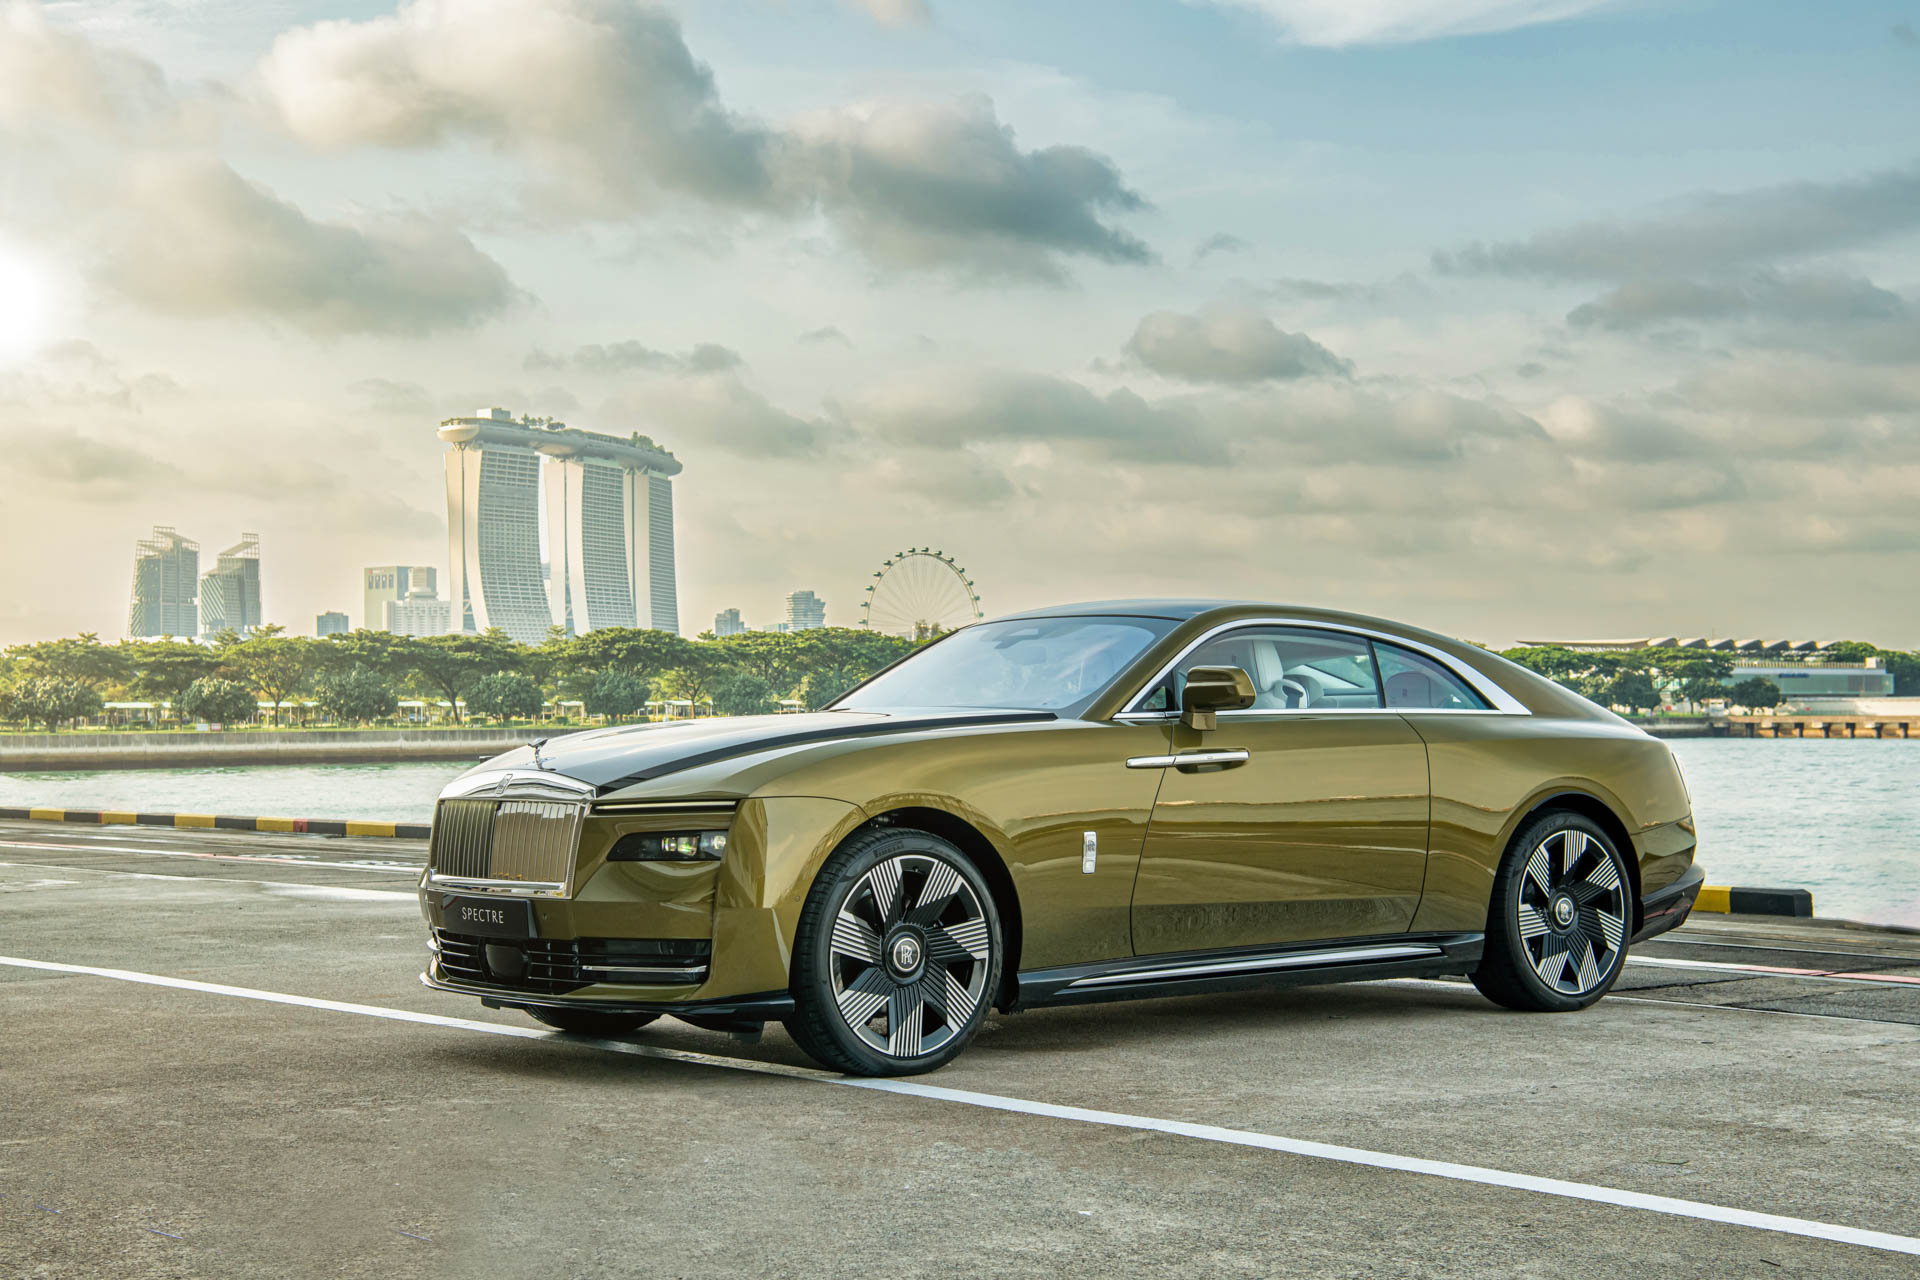 rolls-royce ushers in a new era of mobility with launch of all-electric spectre